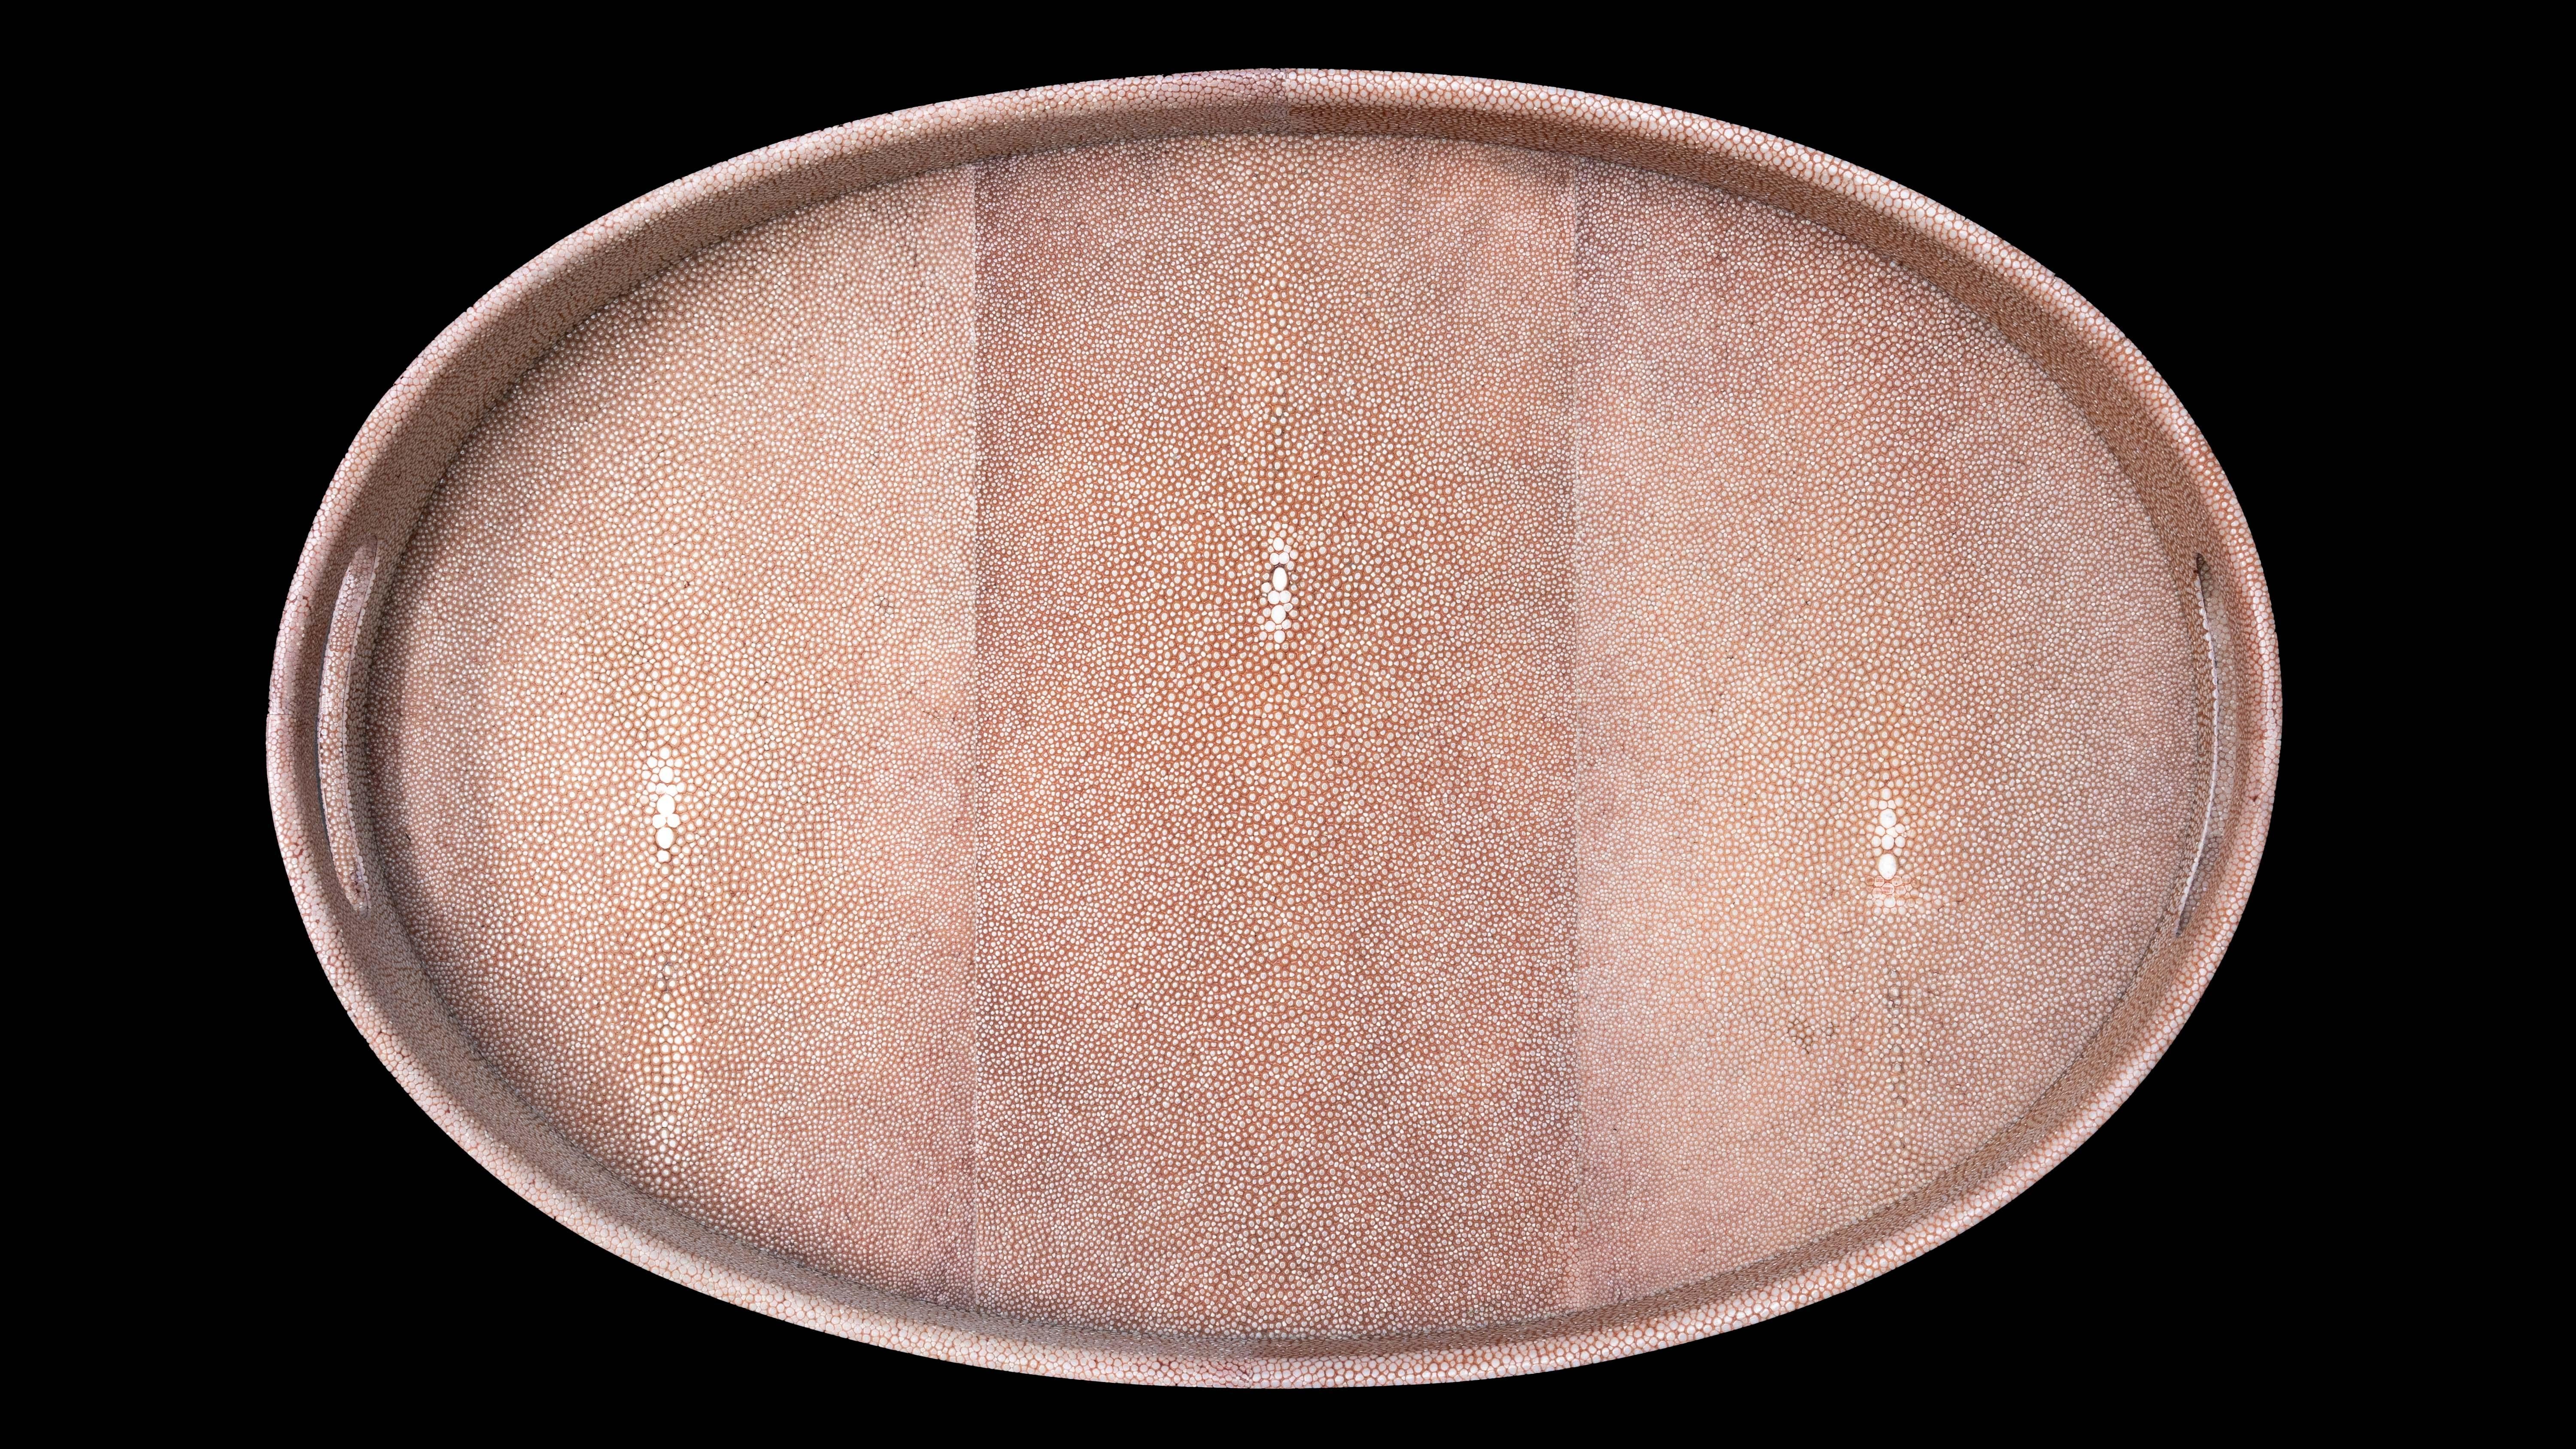 Shagreen oval brown tray

Measures approximately: 17